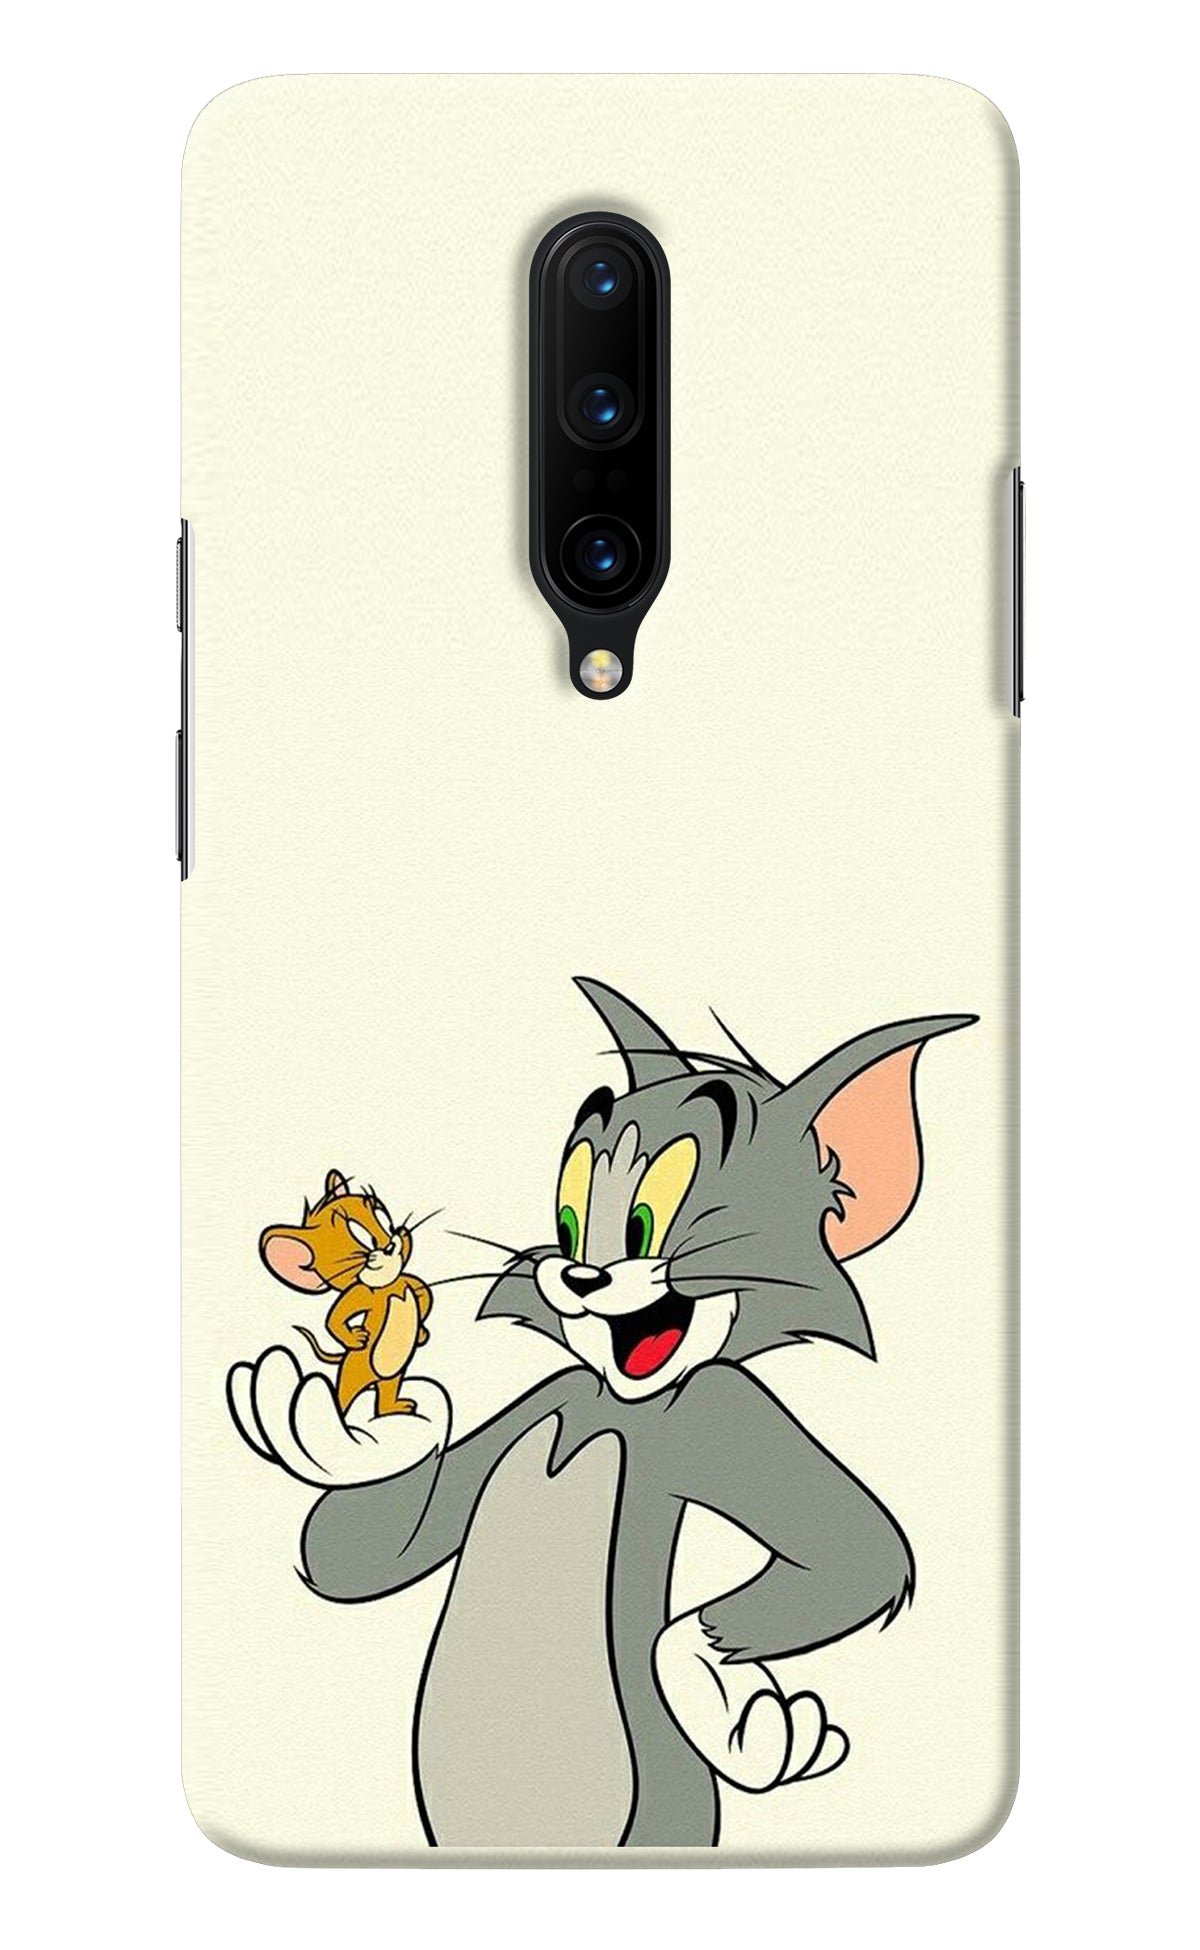 Tom & Jerry Oneplus 7 Pro Back Cover